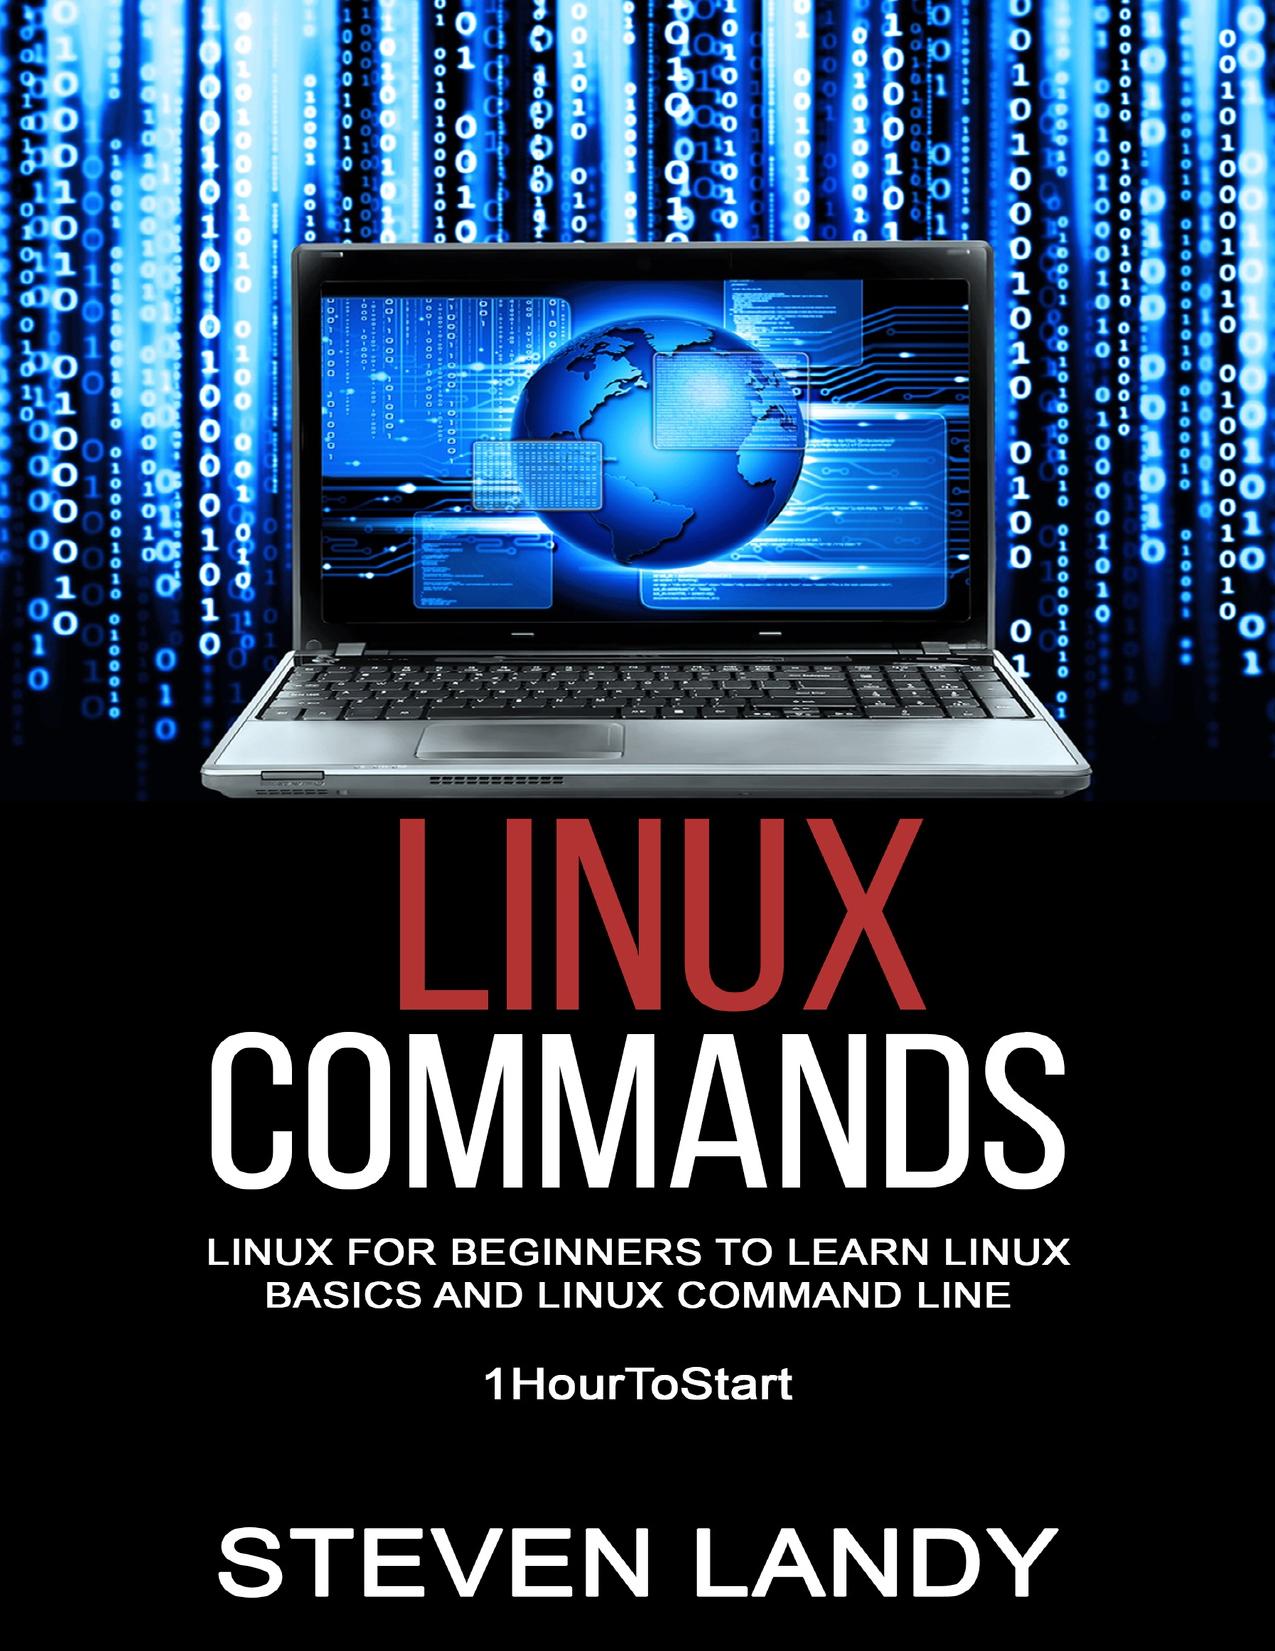 Linux Commands: Linux For Beginners To Learn Linux Basics and Linux Command Line (1HourToStart) by Landy Steven